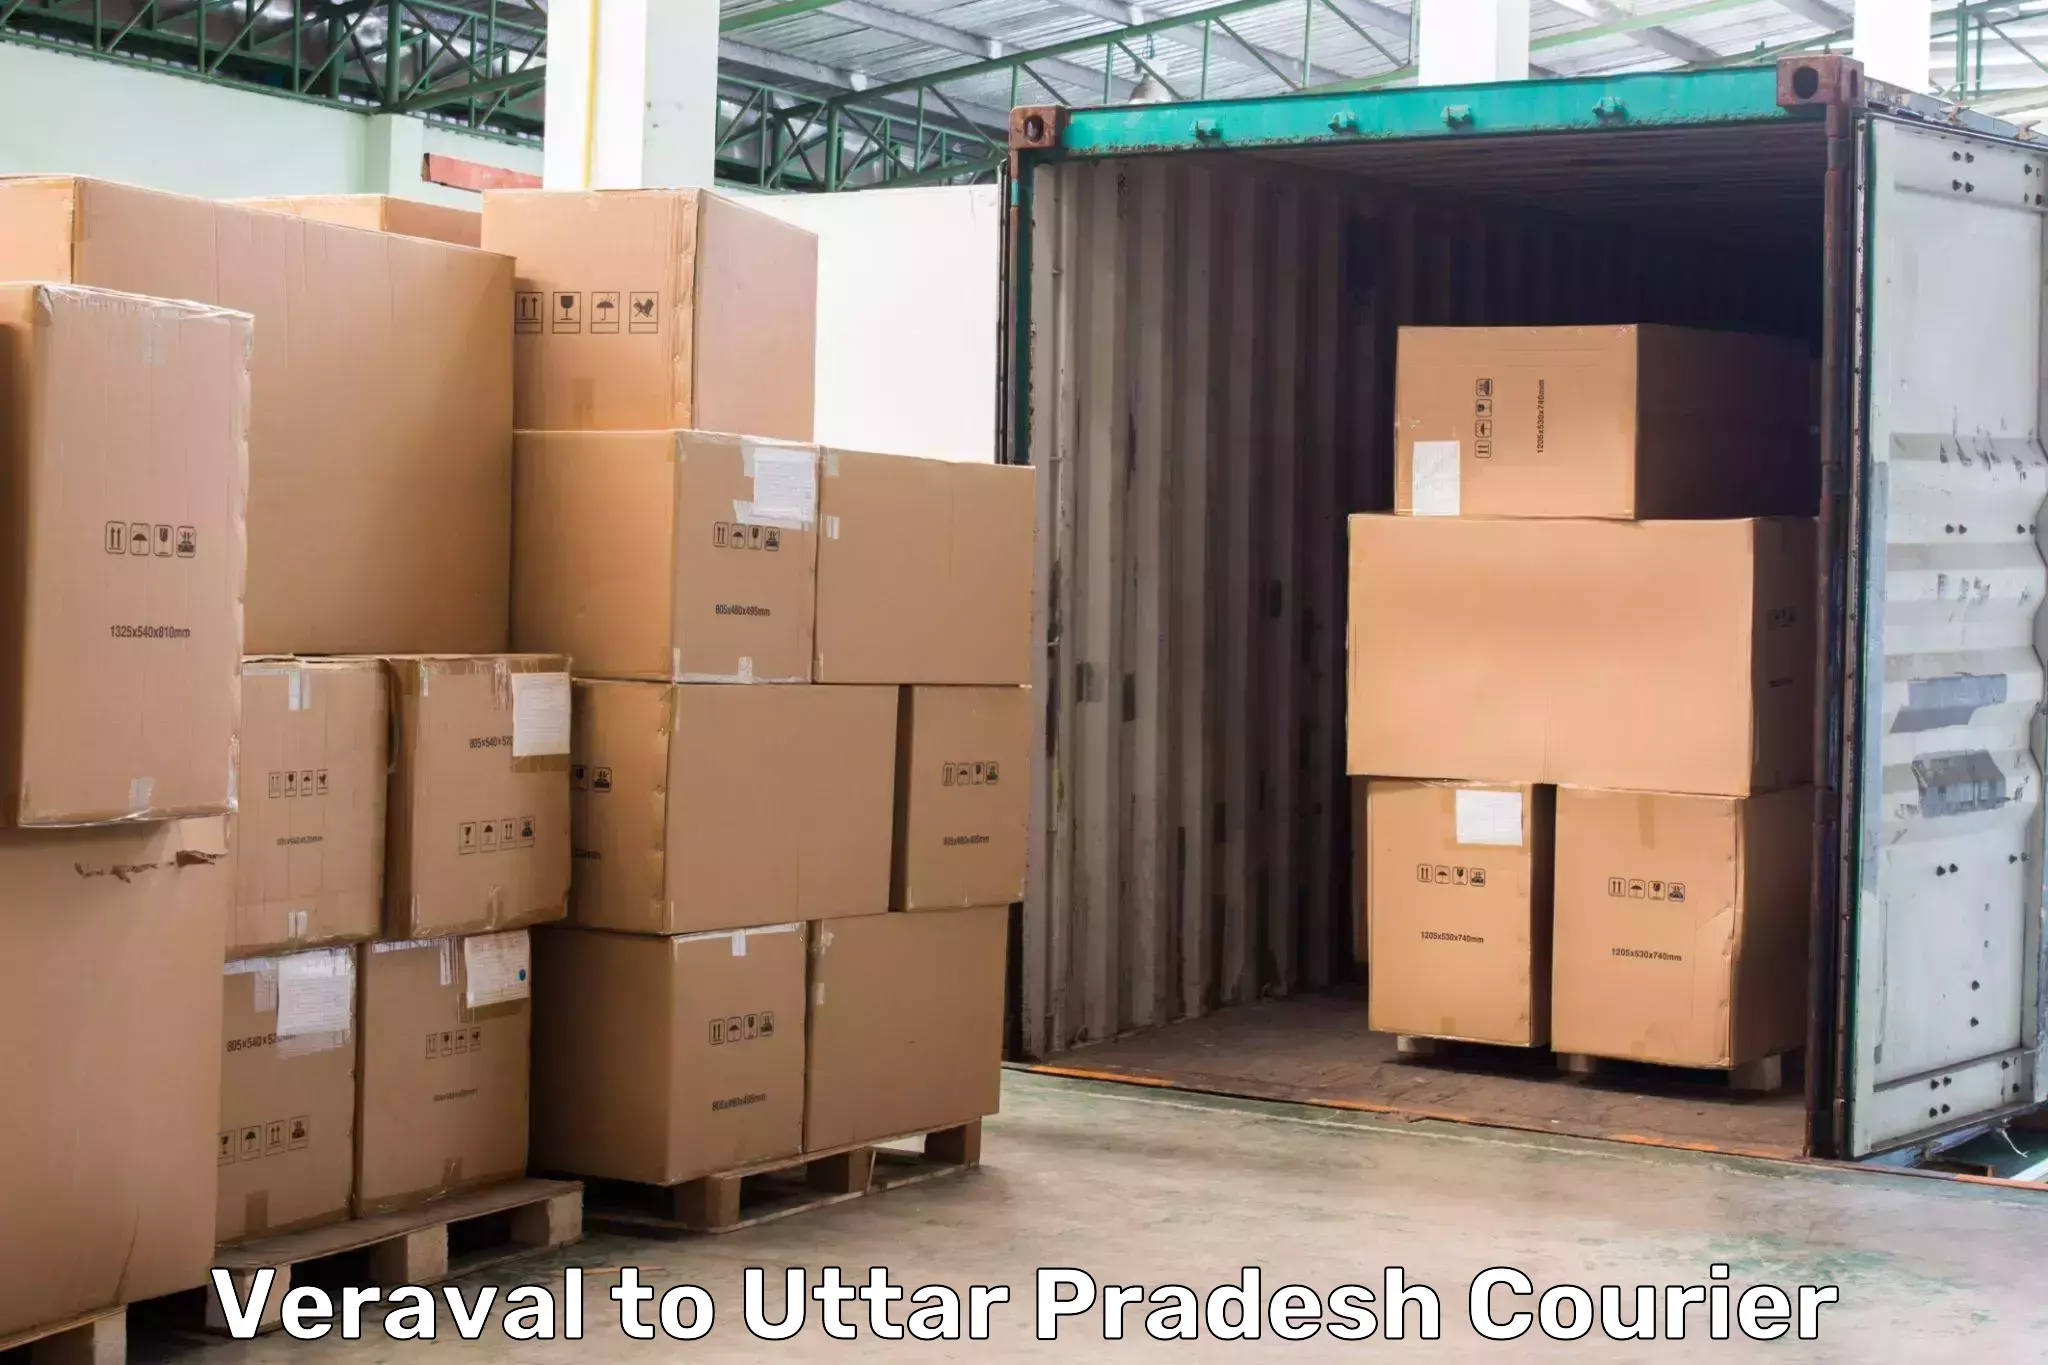 Efficient parcel tracking Veraval to Agra